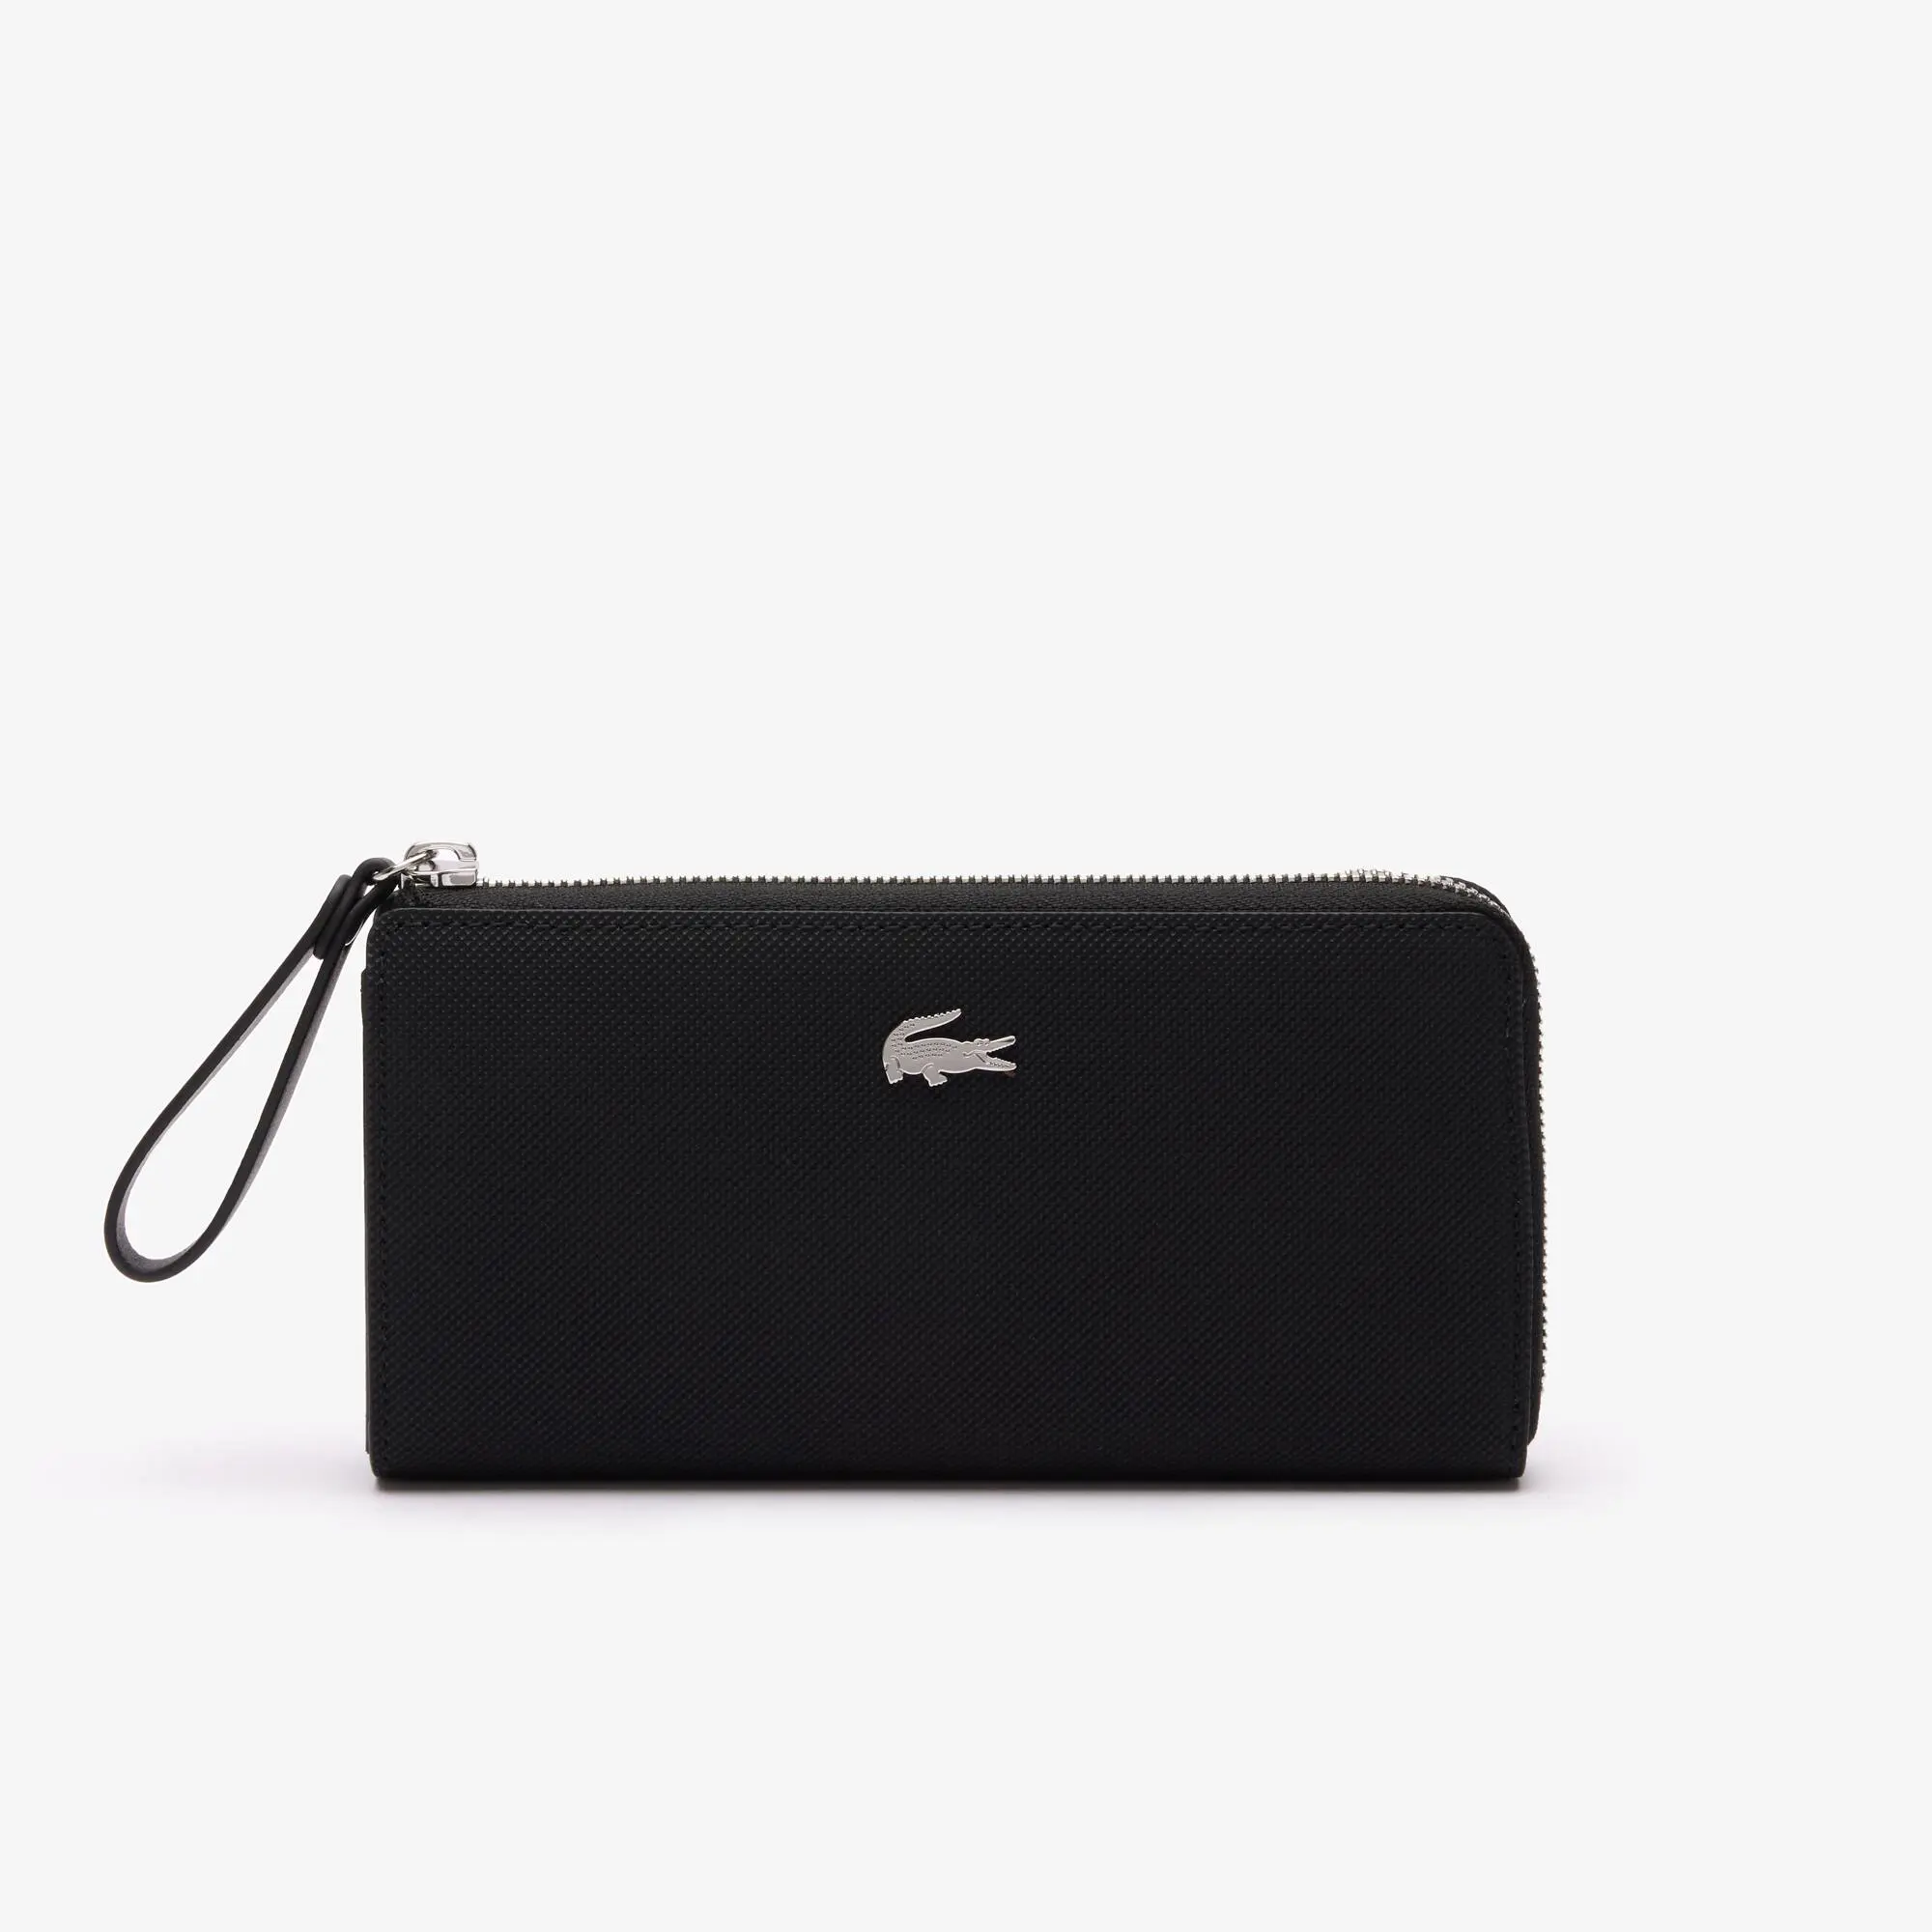 Lacoste Daily Lifestyle Coated Canvas Zipped Billfold. 1